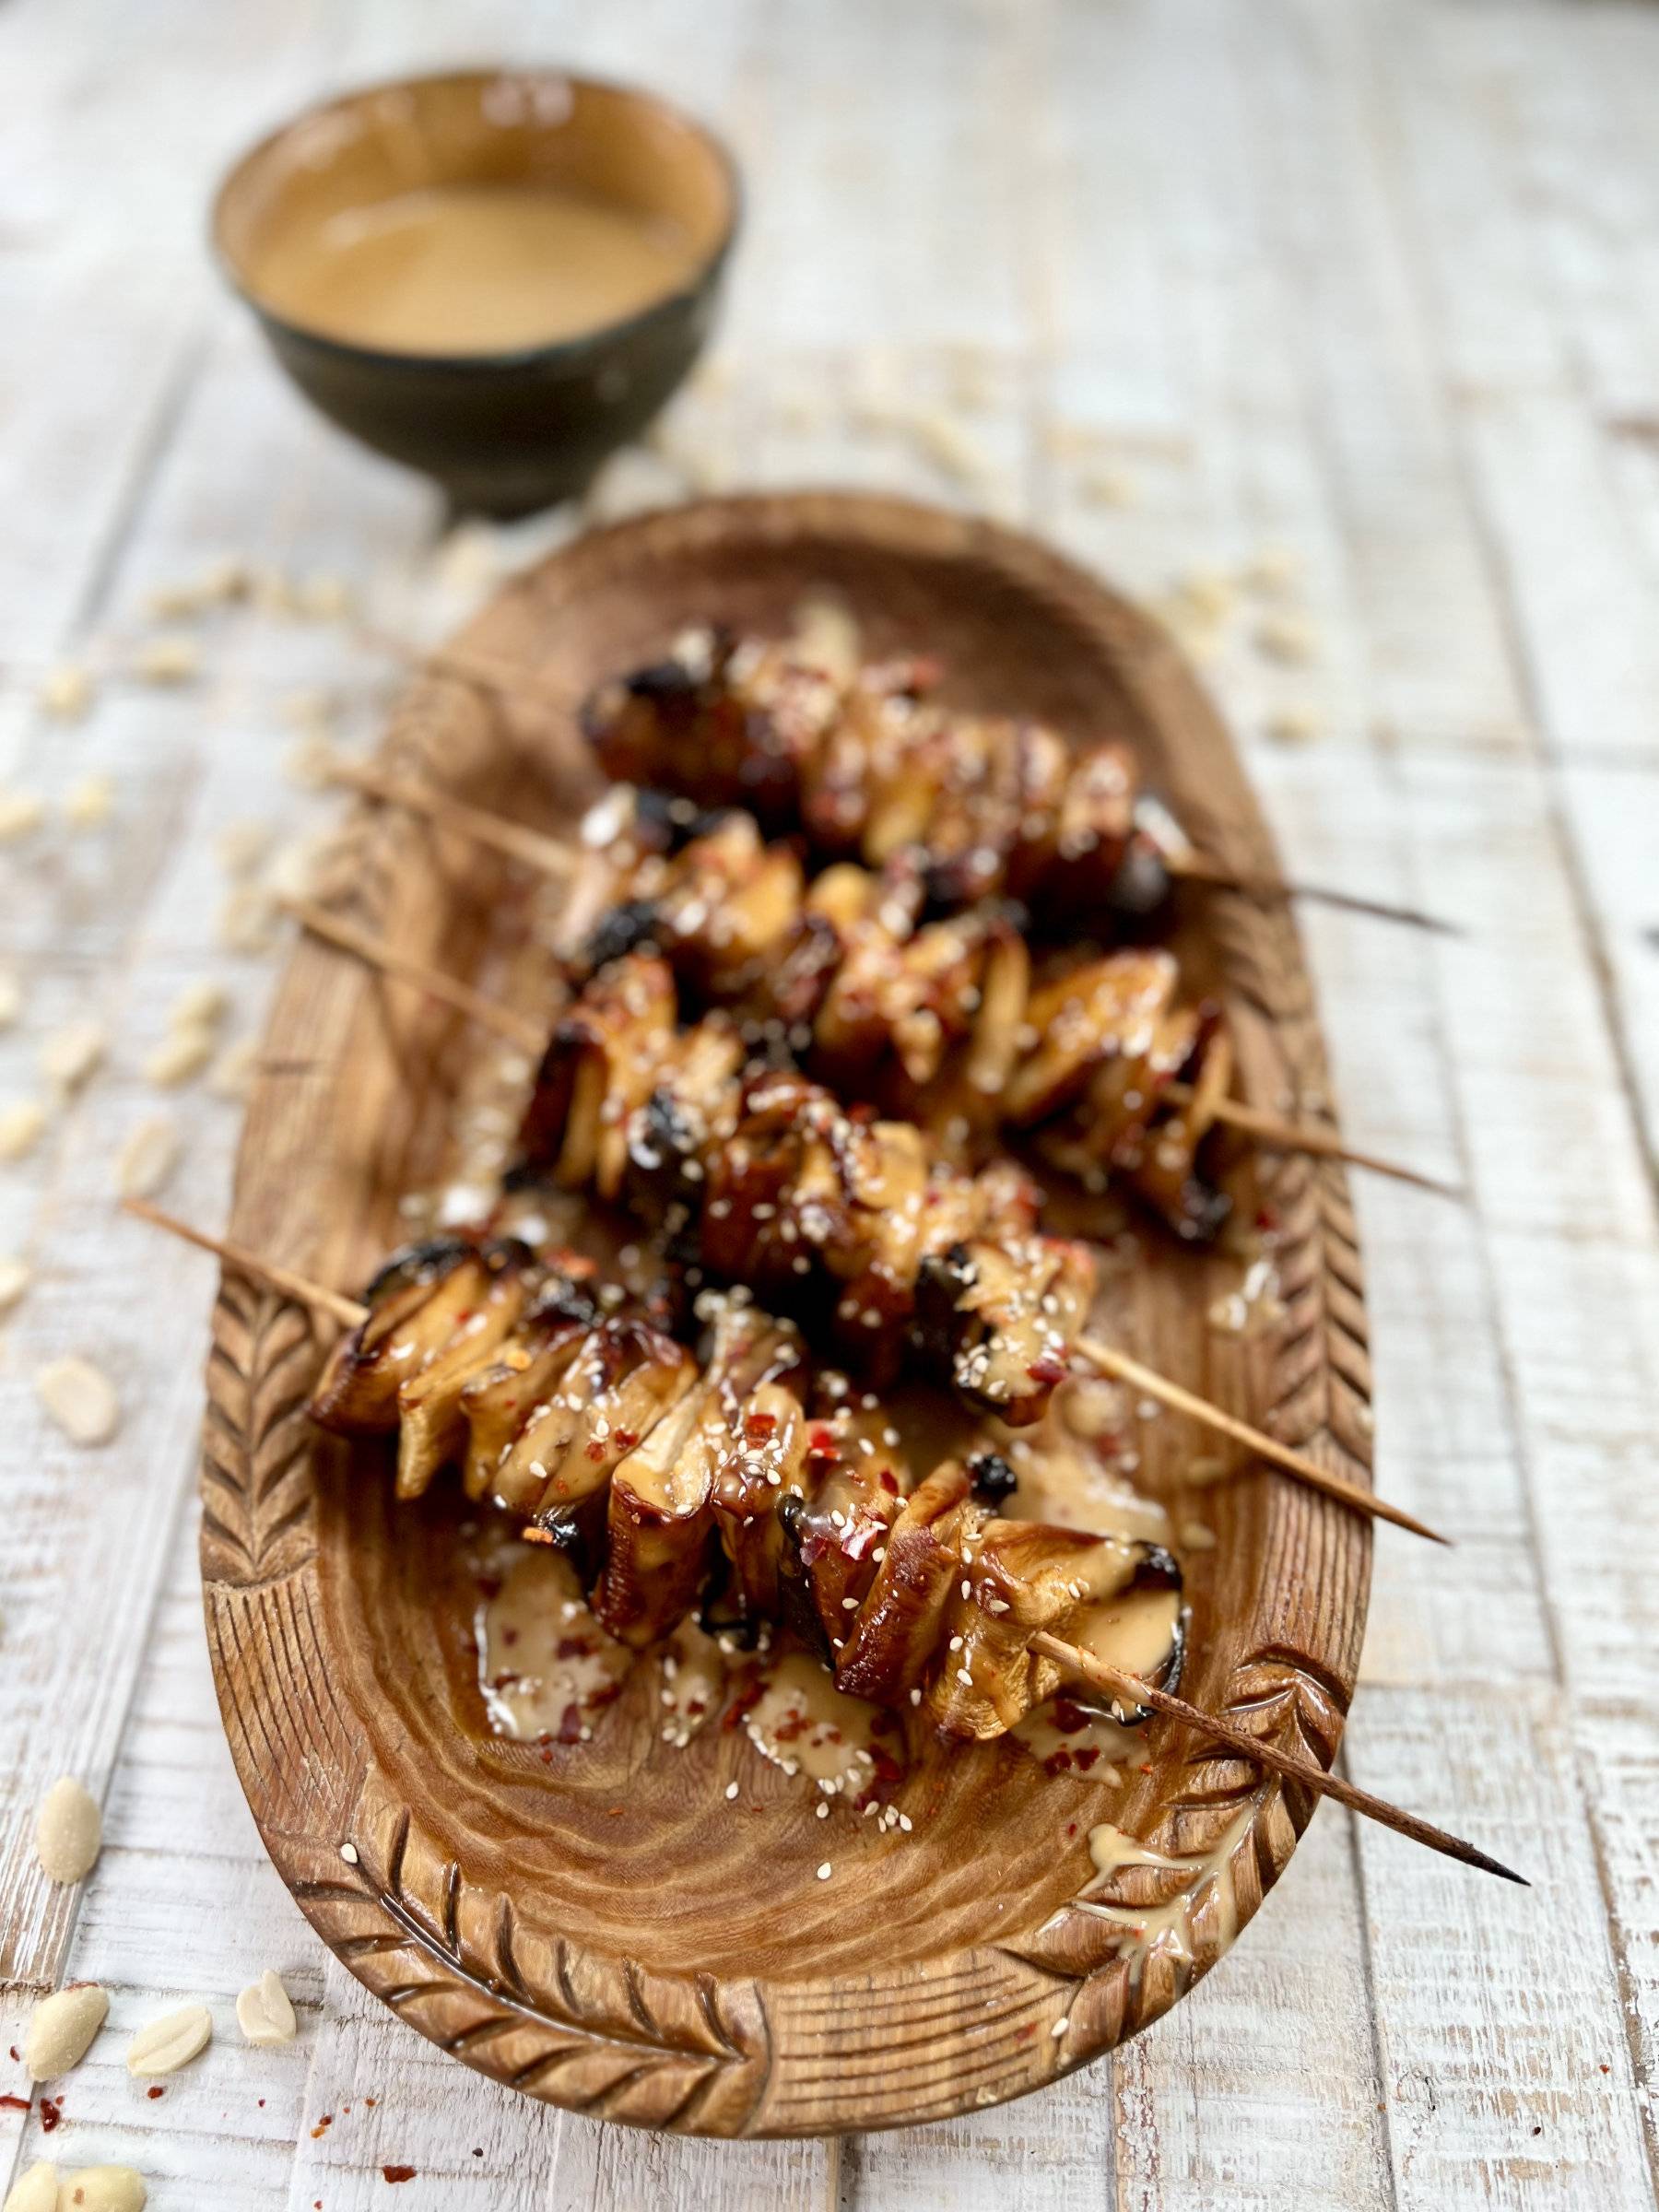 Vegan skewers served with peanut sauce and chilli flakes